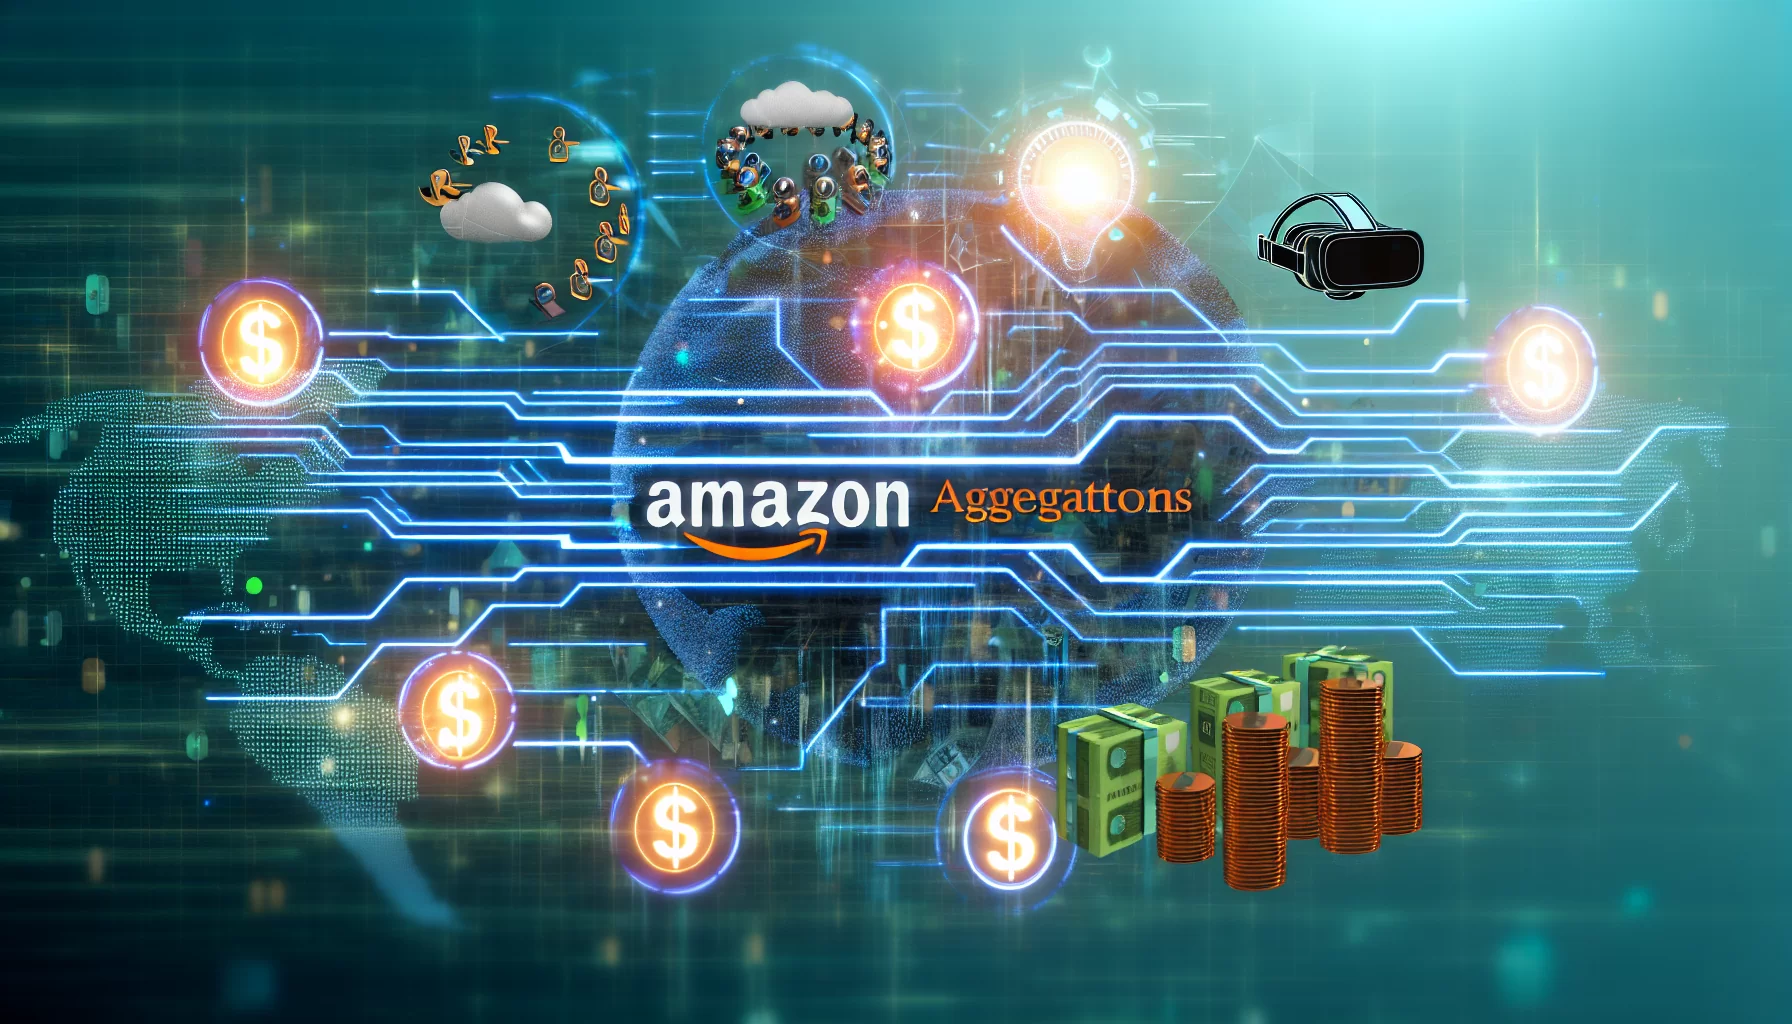 Amazon aggregators: changing the e-commerce landscape through innovative tech investments